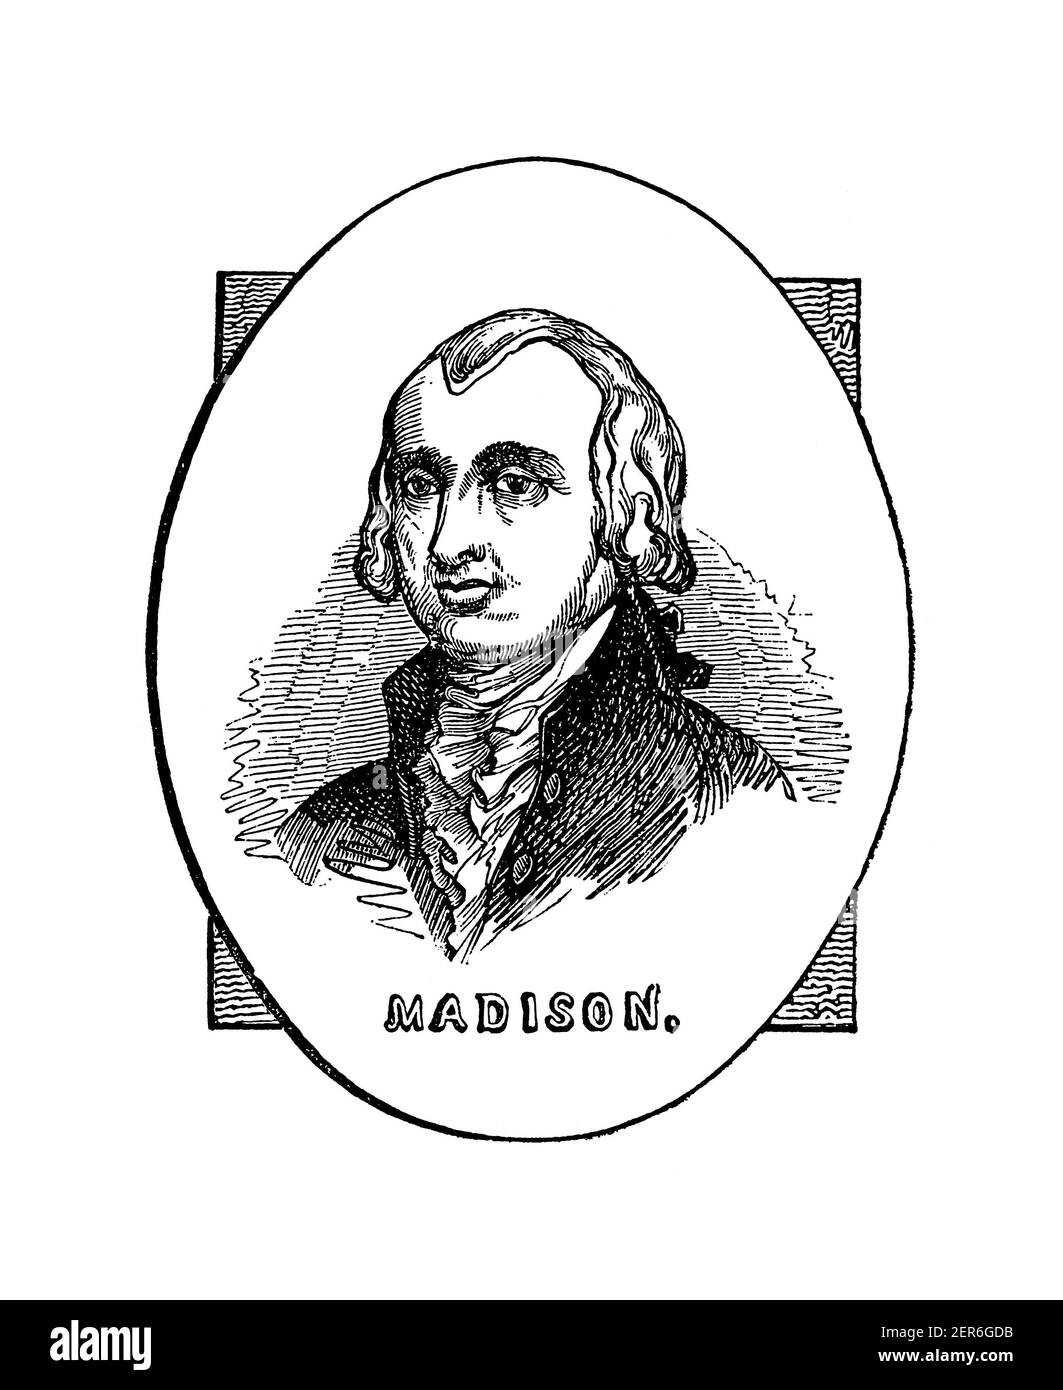 19th-century portrait of James Madison, the fourth President of the United States. Illustration published in The Pictorial Life of General Washington Stock Photo